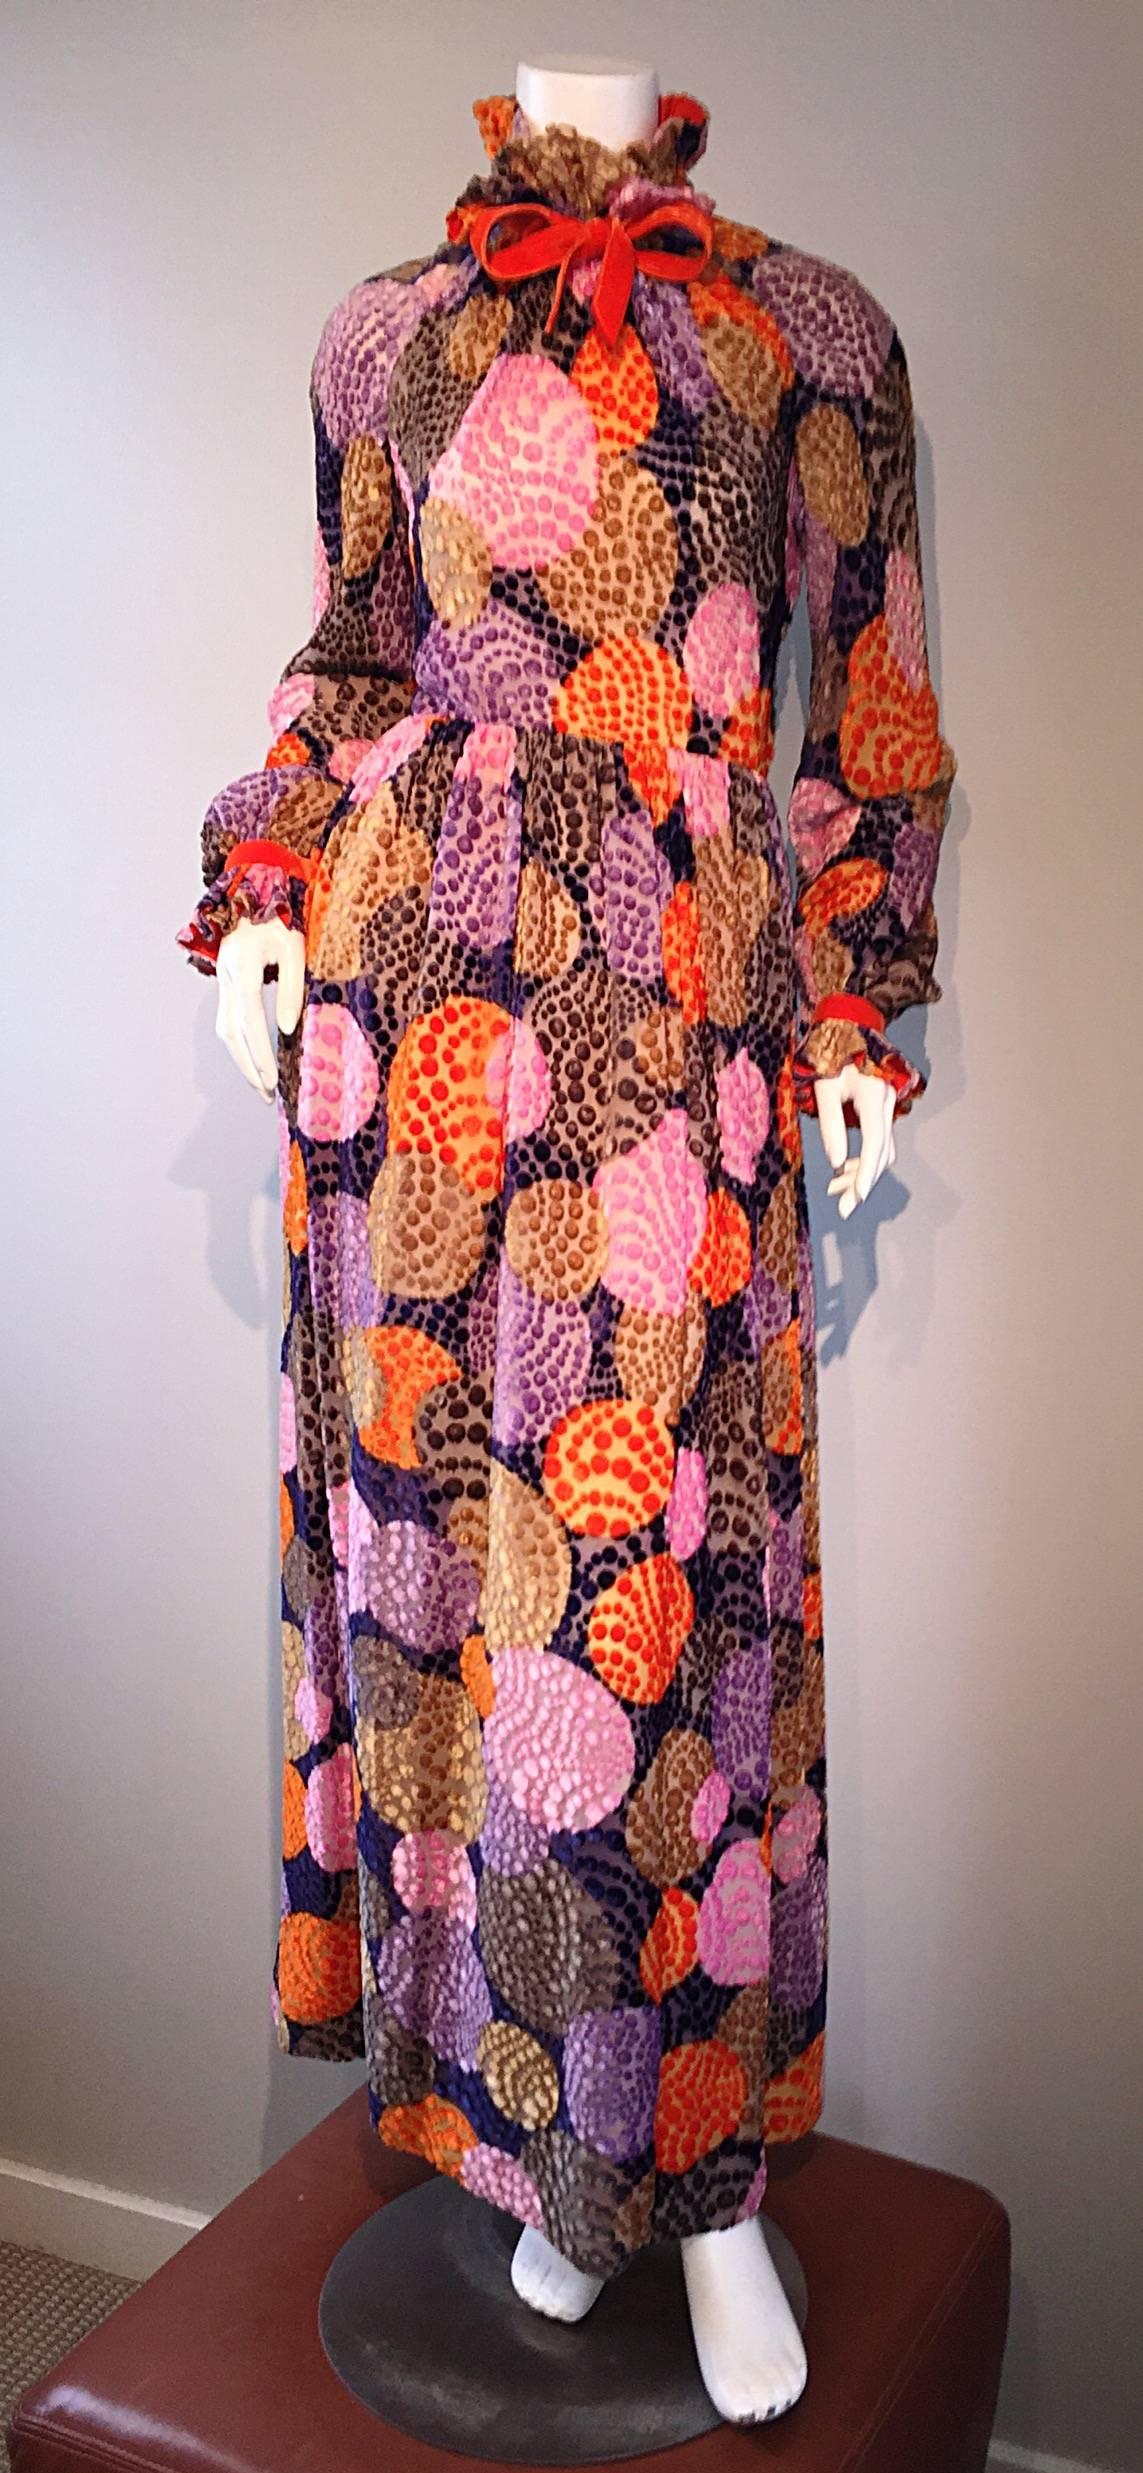 Sensational vintage GEOFFREY BEENE silk dress, with burnt-out silk velvet! Beautiful colors of purples, pinks, oranges, and taupe, that form an op-art polka dot print throughout. Full zip up the back, with two hook-and-eye closures at back neck.